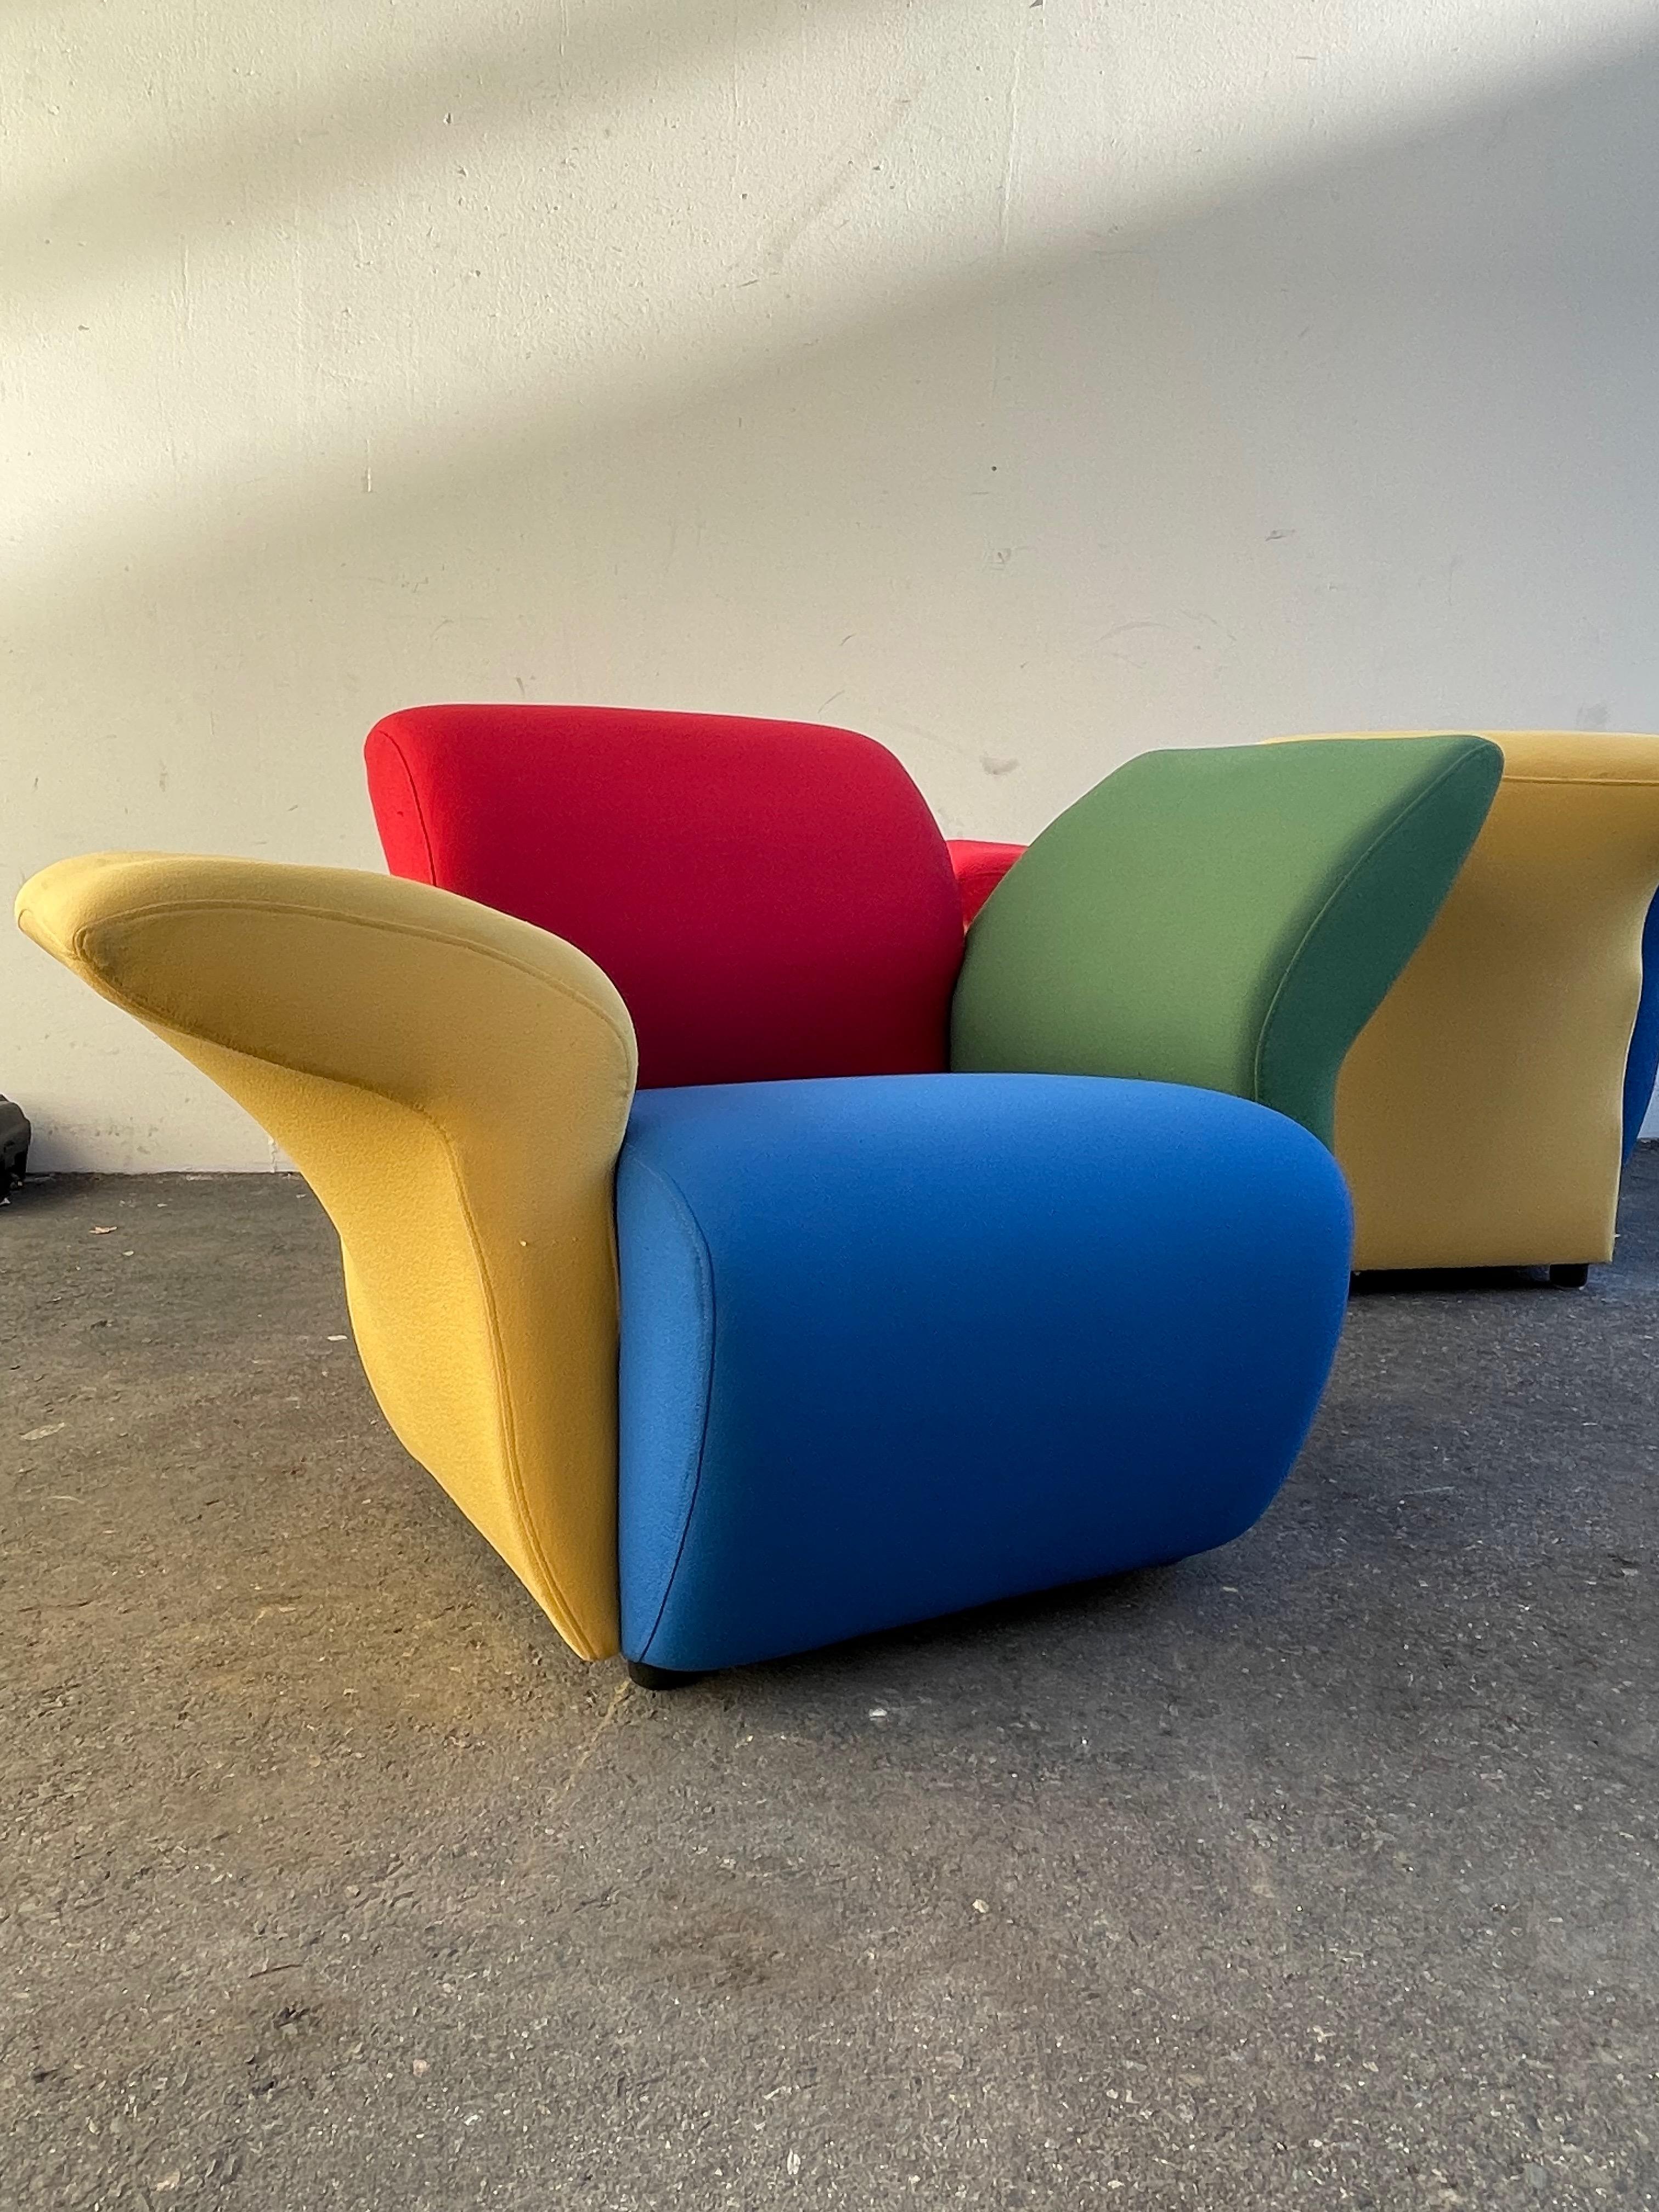 Postmodern Multicolor Lounge Chairs by David Burry, Montreal, 1980s For Sale 3